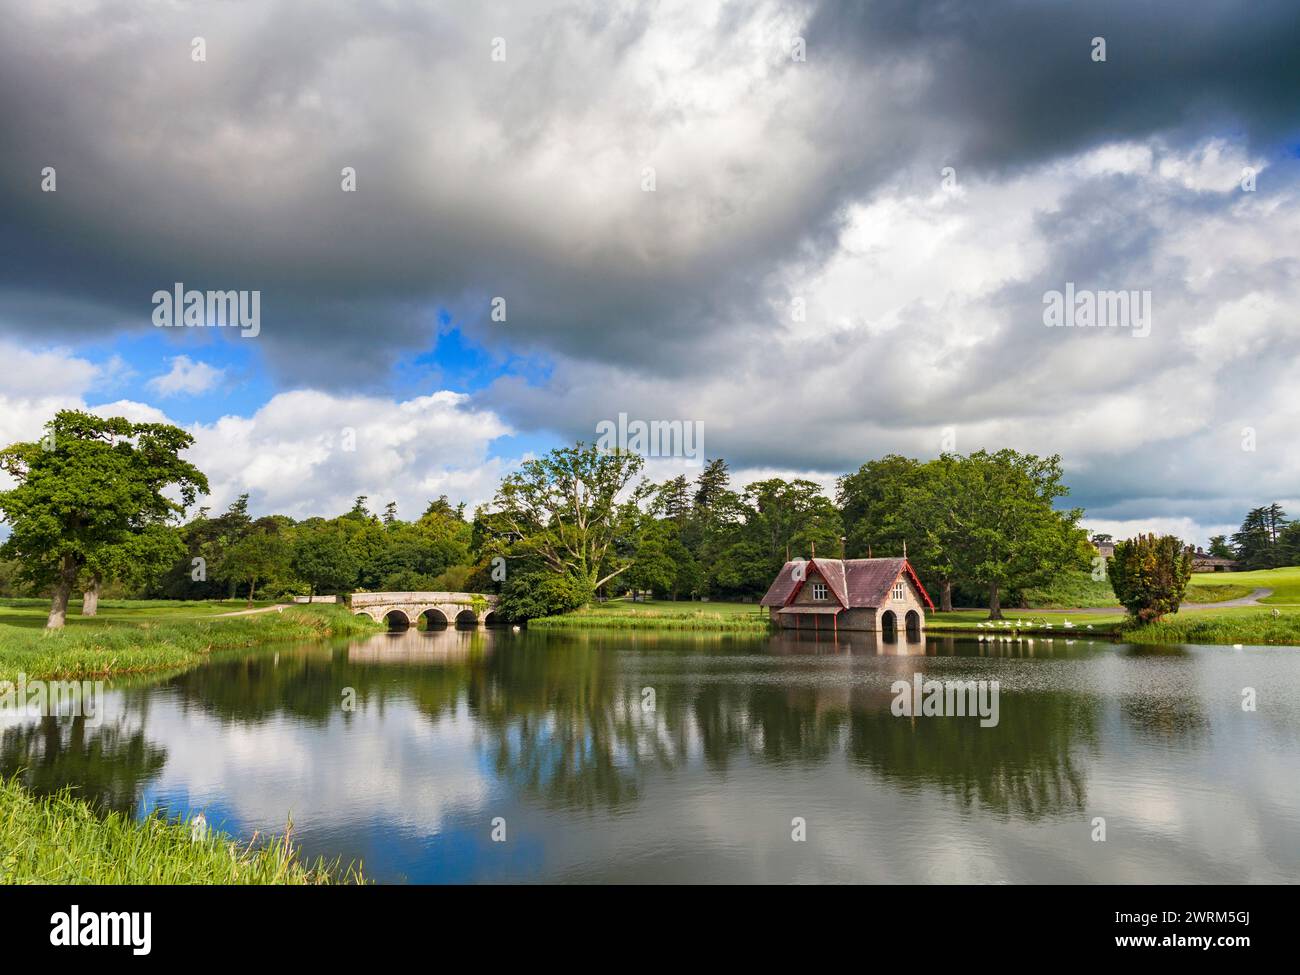 The 19th-century Boat House  and 18th-century bridge,on Rye Water in the Carton House estate  in County KIldare, Ireland, Stock Photo